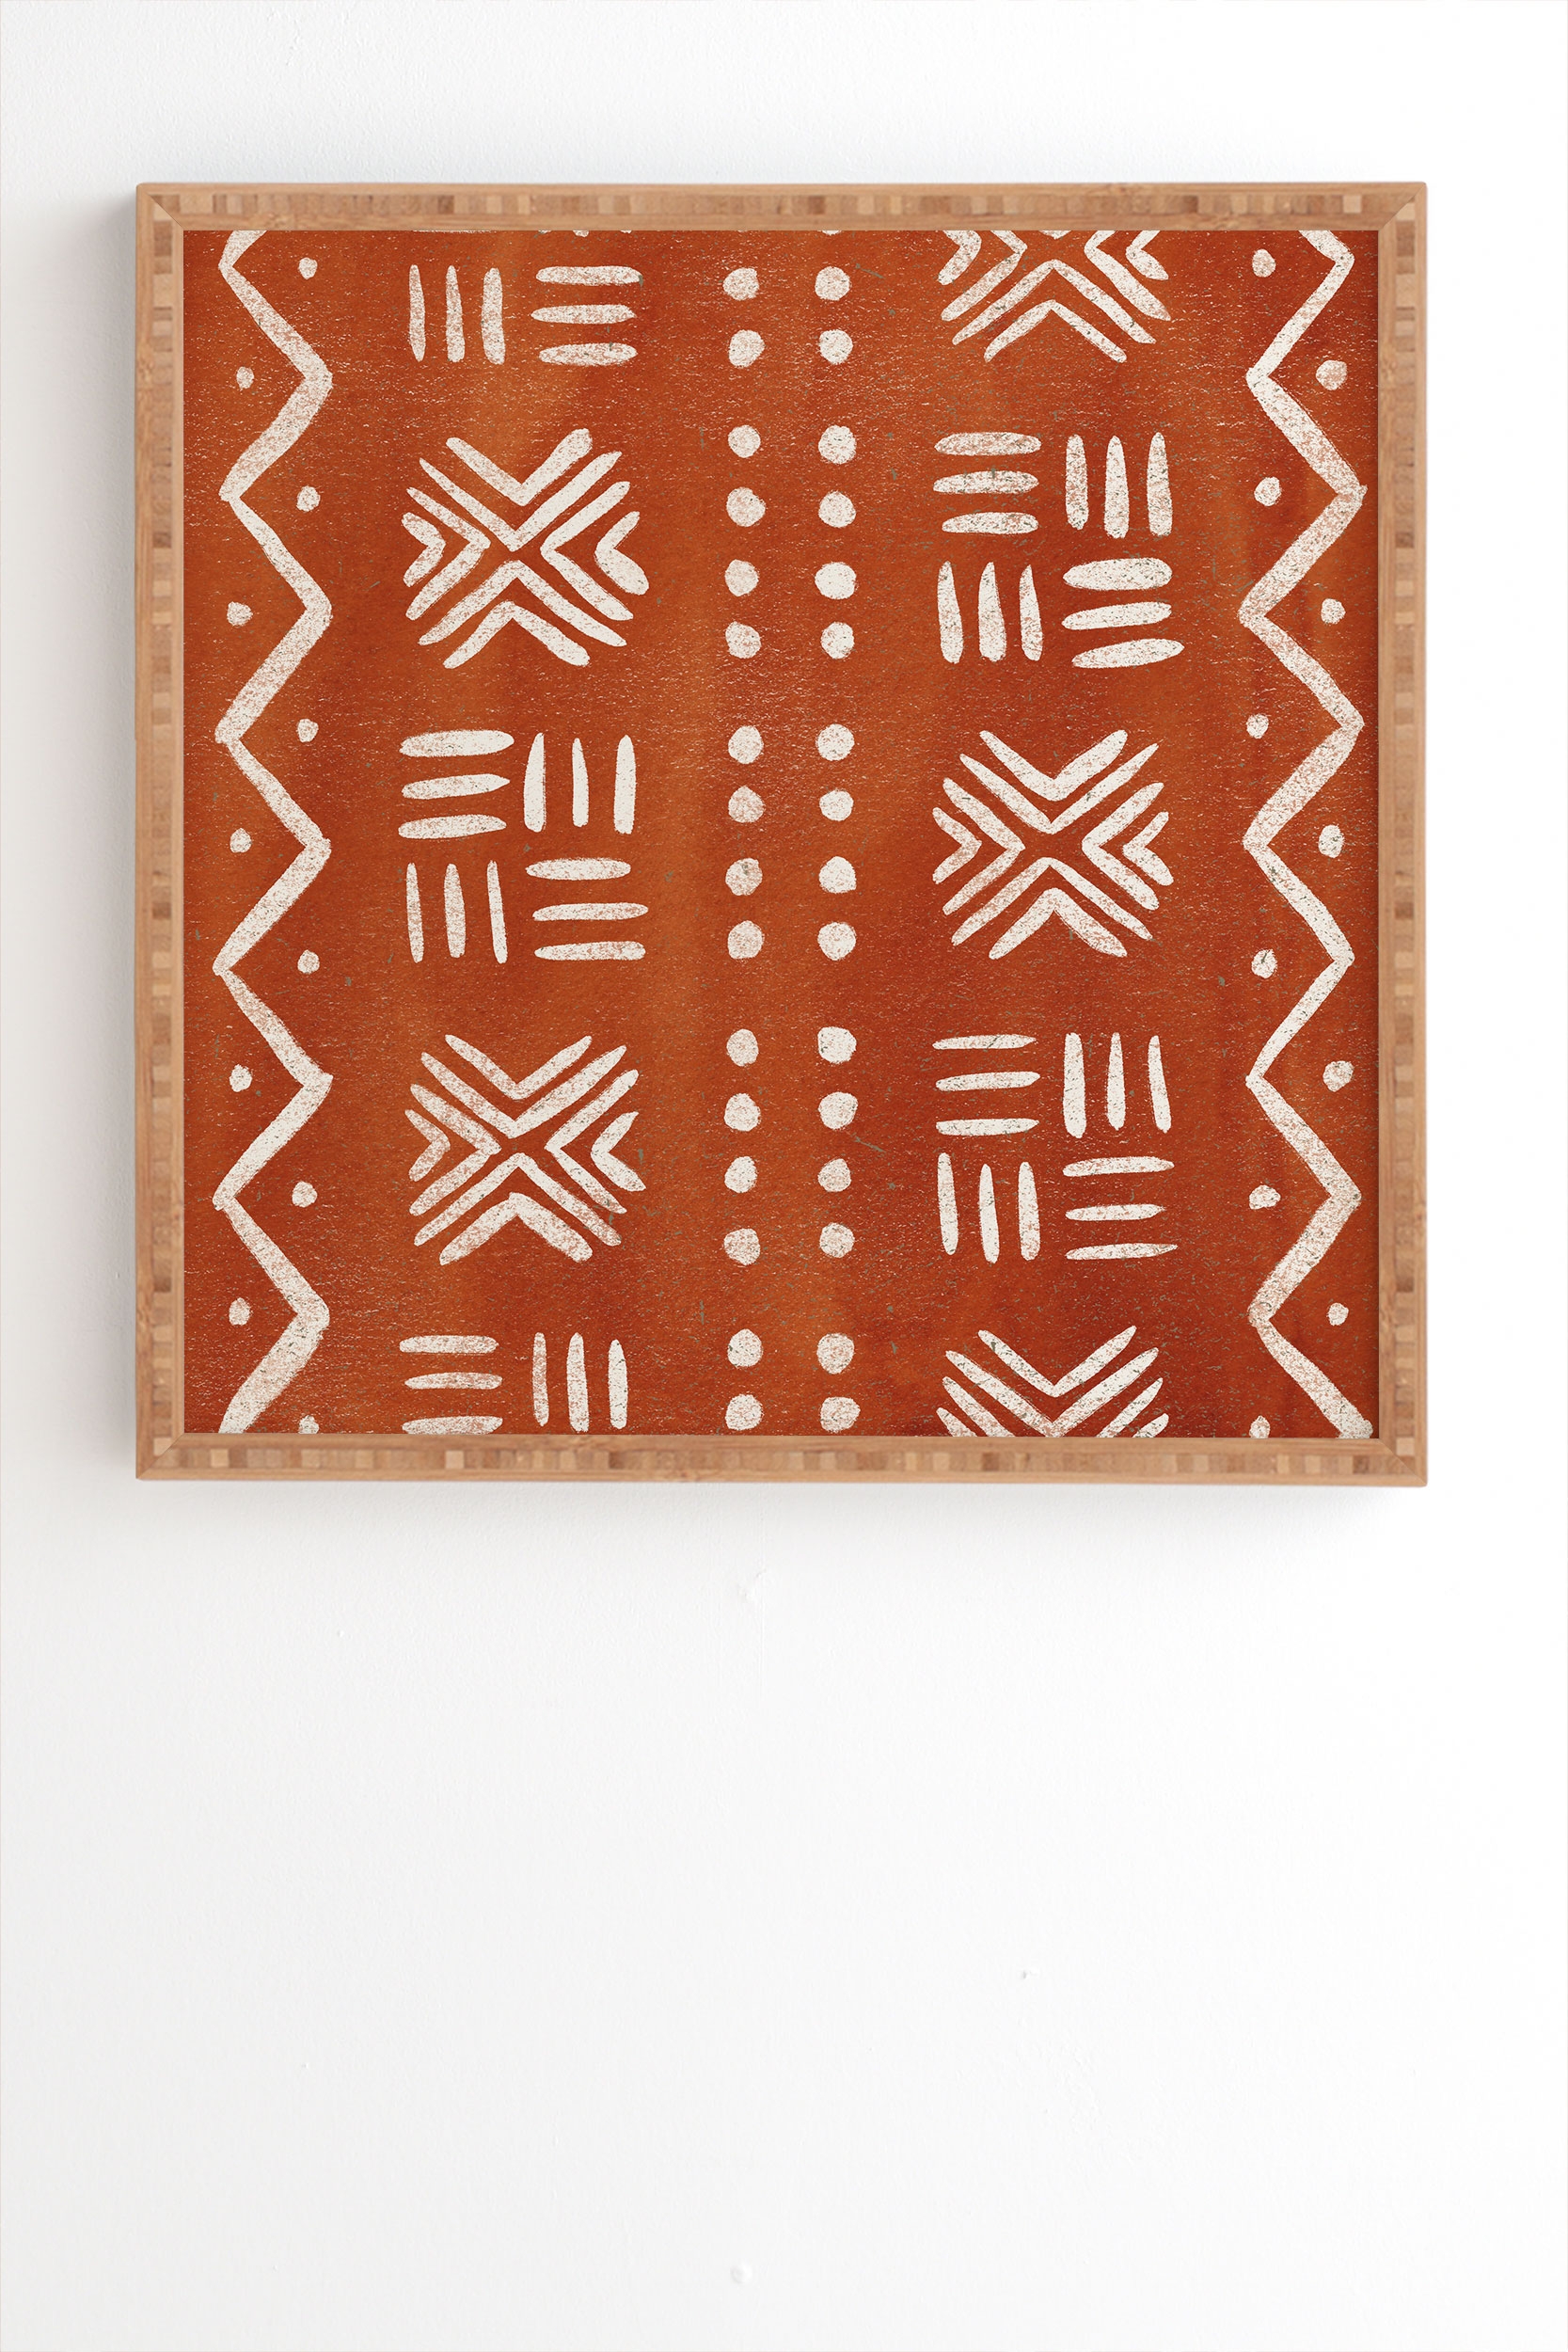 Mud Cloth Rust by Pauline Stanley - Framed Wall Art Bamboo 20" x 20" - Image 1